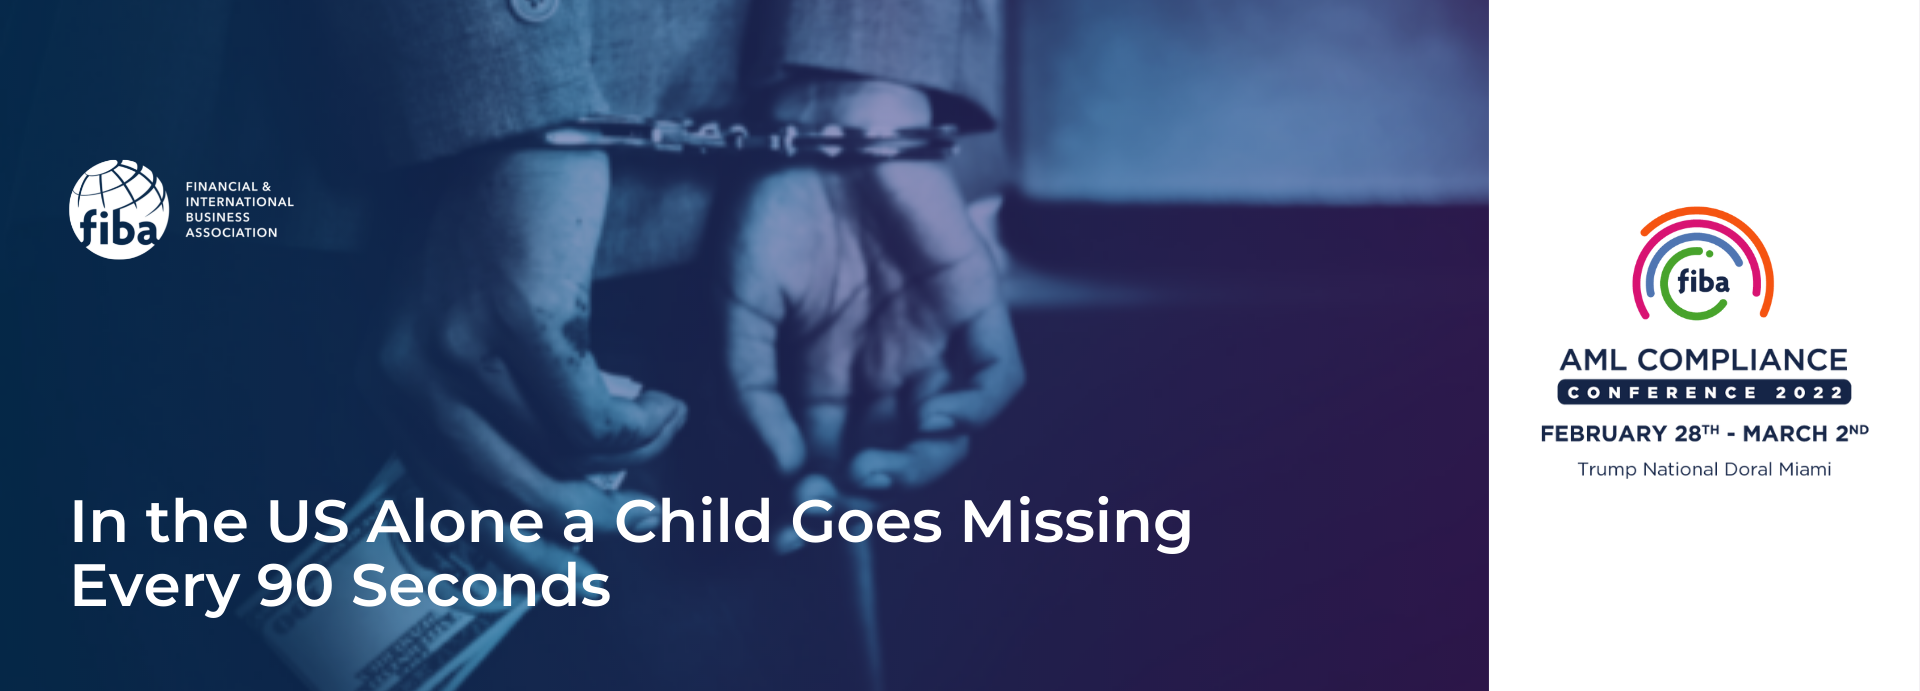 In the US Alone a Child Goes Missing Every 90 Seconds